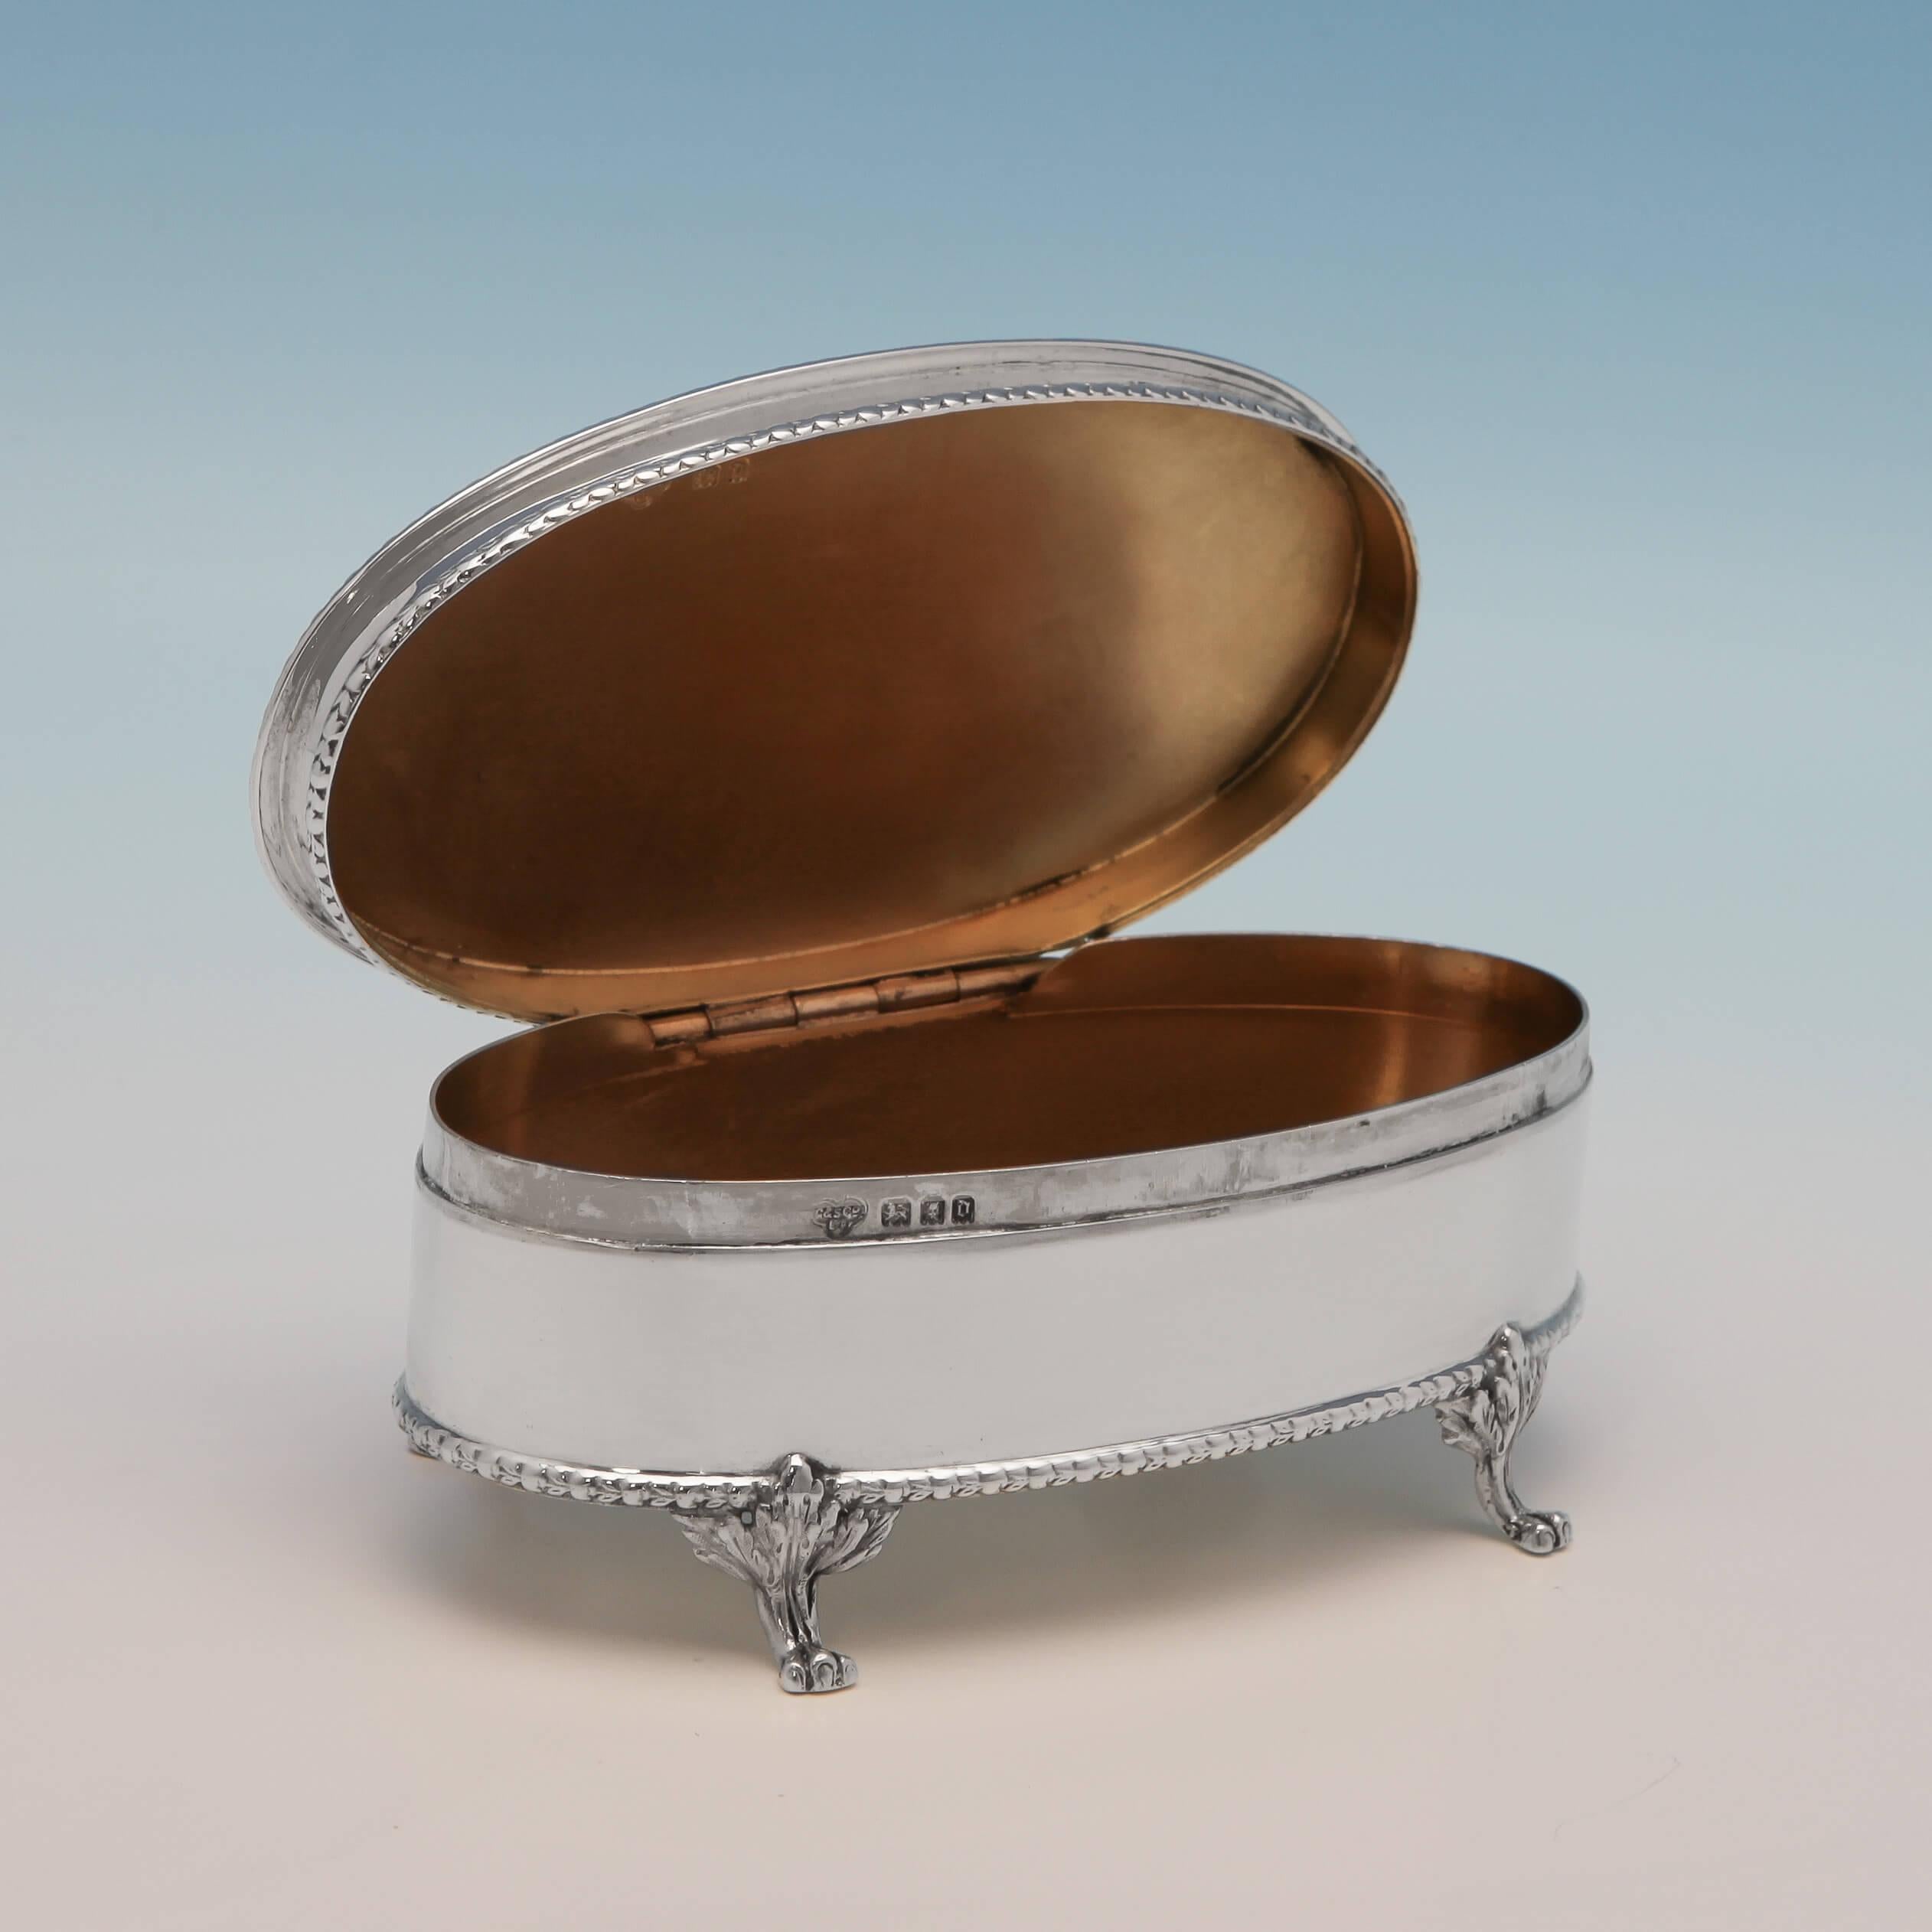 Hallmarked in London in 1919 by Goldsmiths and Silversmiths Co. This refined sterling silver jewellery box features an oval body with rope borders, a gilt interior, and stands on four paw feet. The jewellery box measures: 5